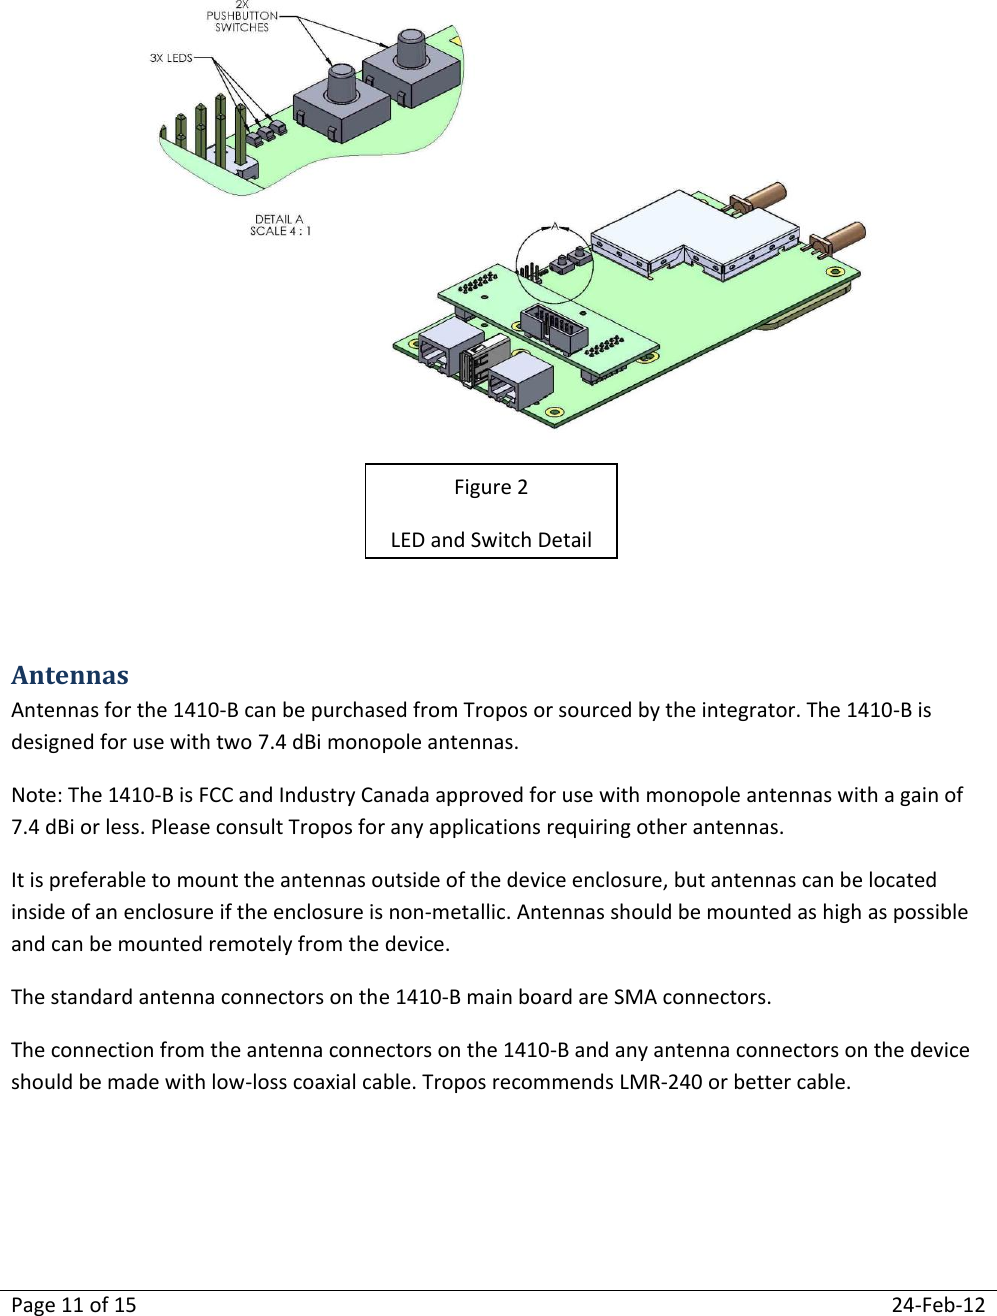 Page 11 of 15  24-Feb-12     Antennas Antennas for the 1410-B can be purchased from Tropos or sourced by the integrator. The 1410-B is designed for use with two 7.4 dBi monopole antennas. Note: The 1410-B is FCC and Industry Canada approved for use with monopole antennas with a gain of 7.4 dBi or less. Please consult Tropos for any applications requiring other antennas. It is preferable to mount the antennas outside of the device enclosure, but antennas can be located inside of an enclosure if the enclosure is non-metallic. Antennas should be mounted as high as possible and can be mounted remotely from the device. The standard antenna connectors on the 1410-B main board are SMA connectors.   The connection from the antenna connectors on the 1410-B and any antenna connectors on the device should be made with low-loss coaxial cable. Tropos recommends LMR-240 or better cable.     Figure 2 LED and Switch Detail 